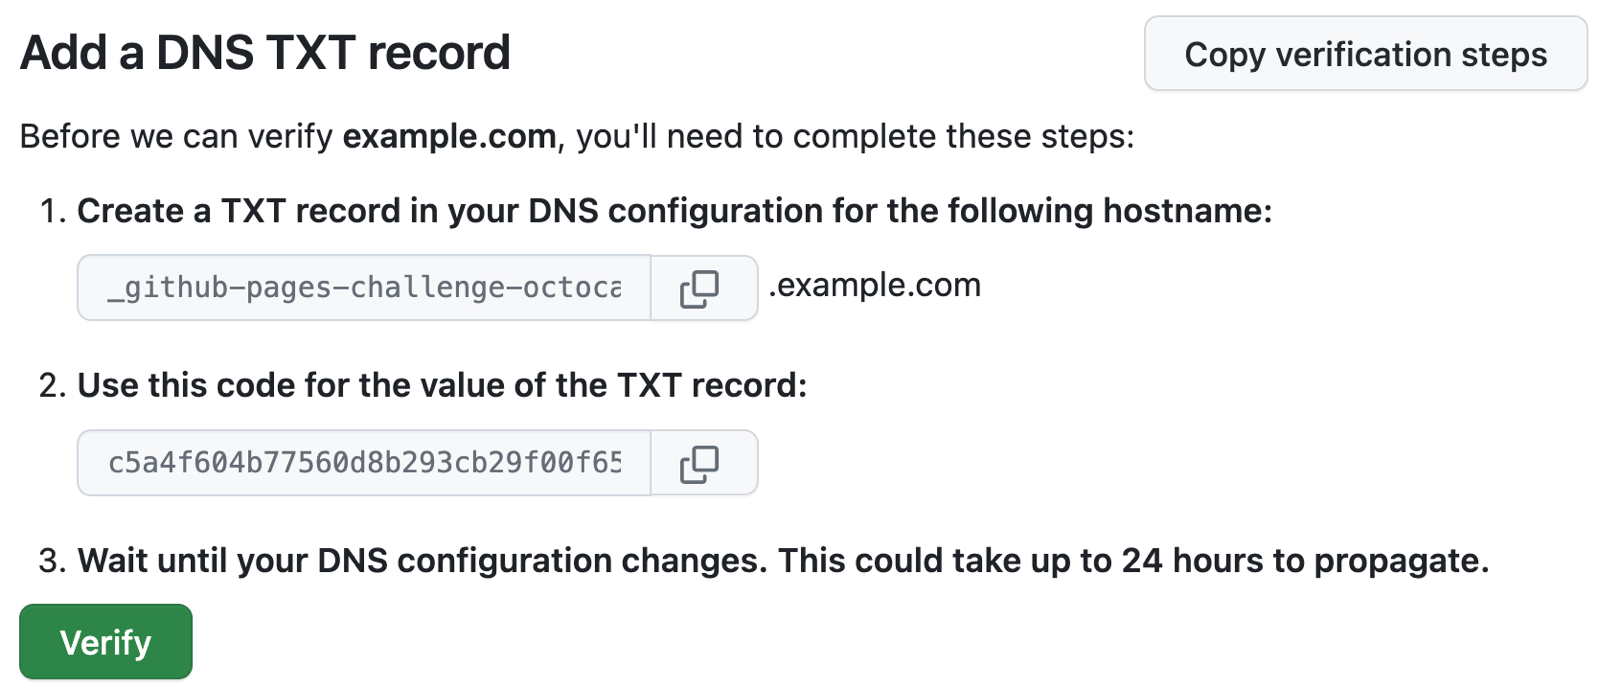 Screenshot of GitHub Pages instructions to add a TXT record to the DNS configuration of example.com.